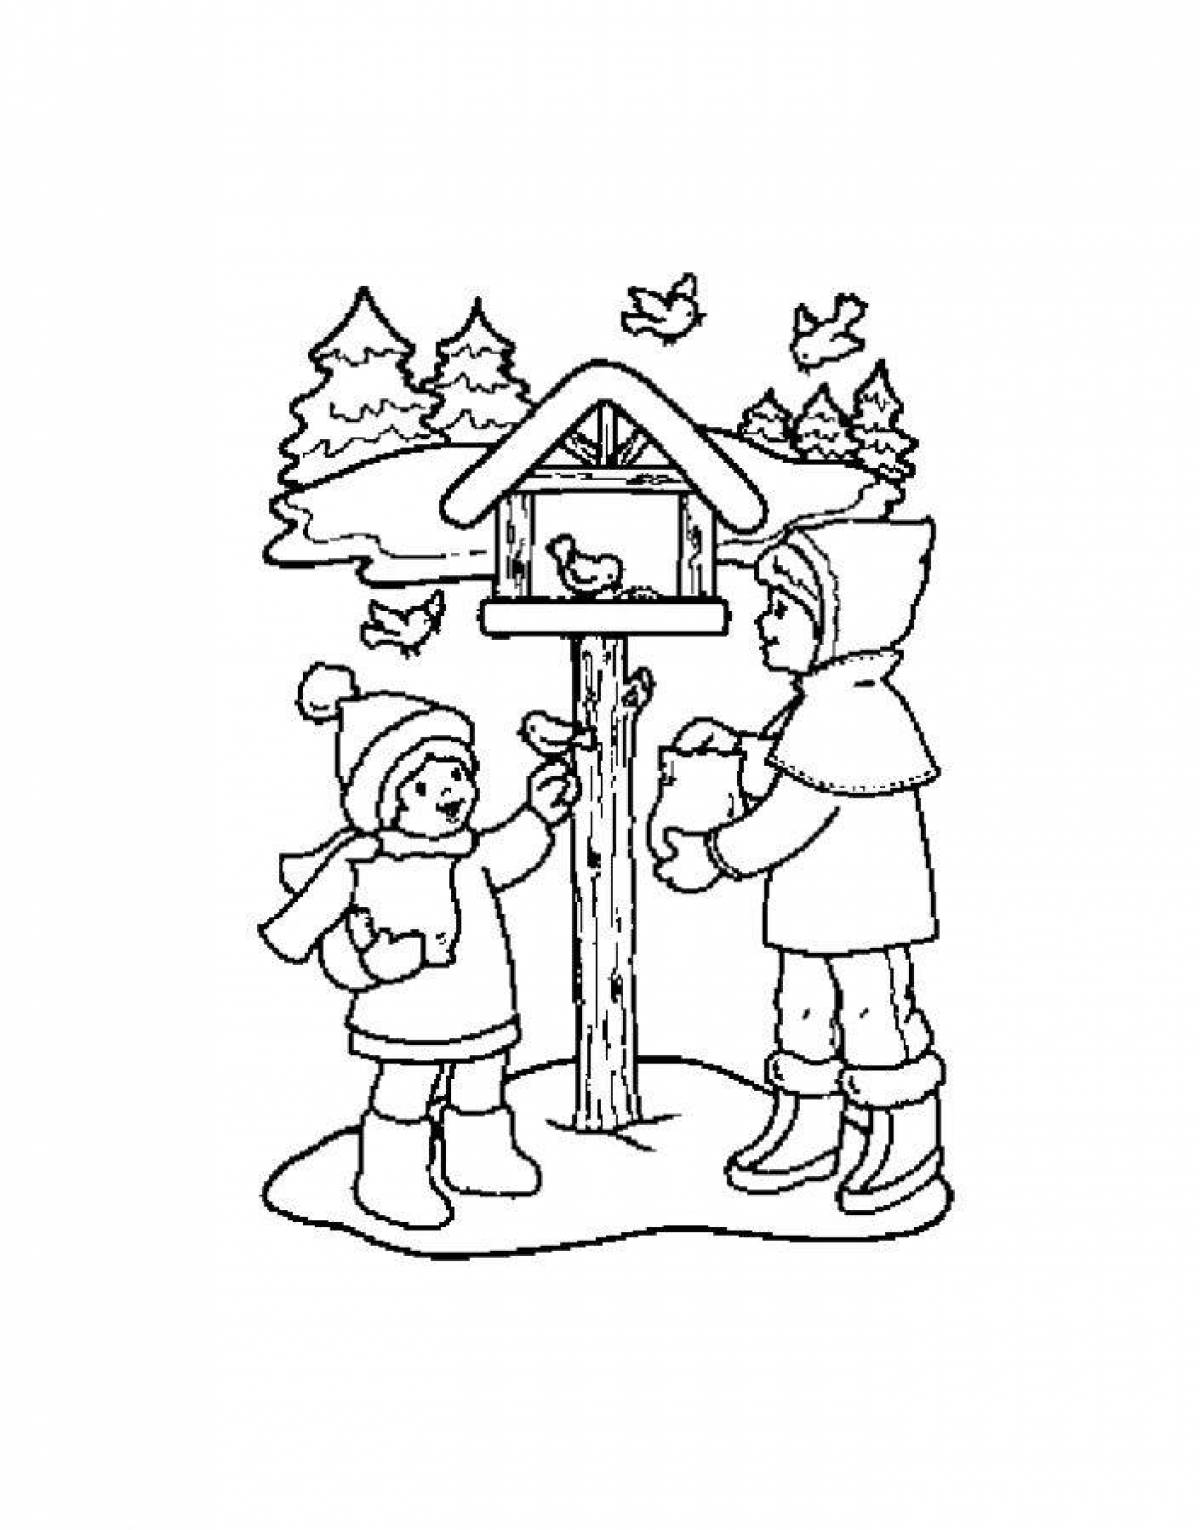 Coloring page charming feeder